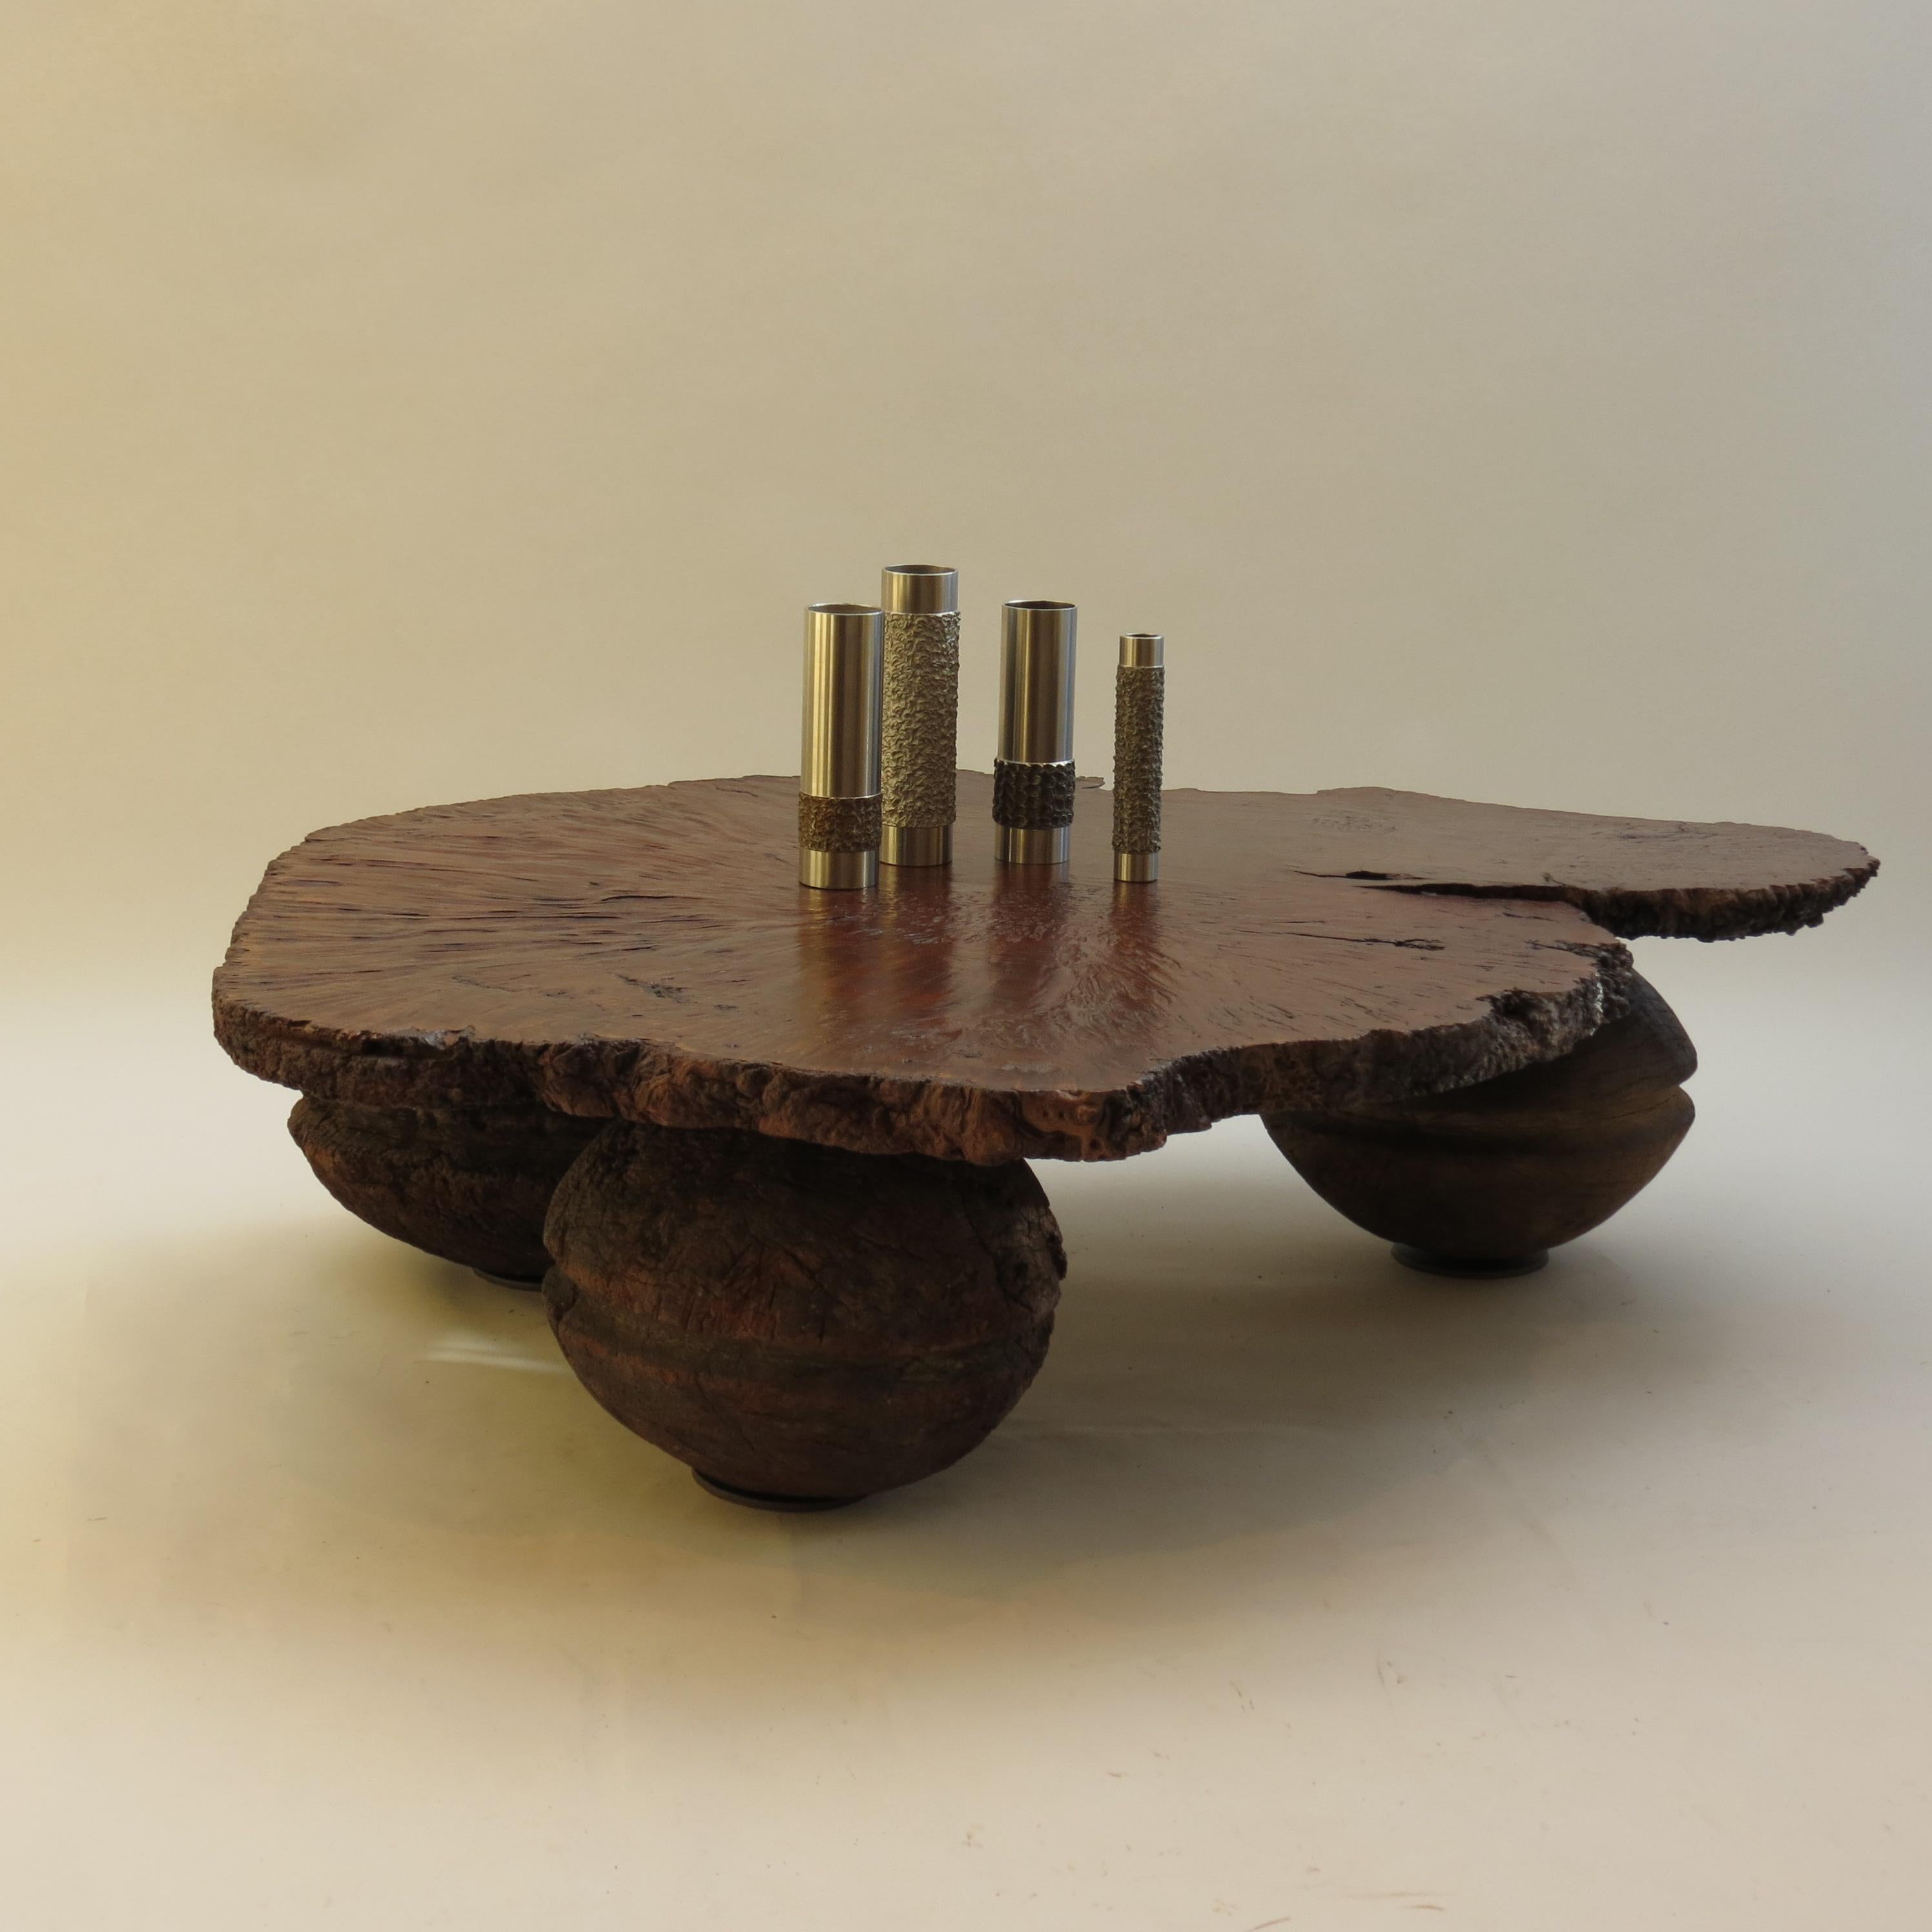 A wonderful bespoke table, made from a very large piece of Australian Karri Wood for the slab top, positioned on three antique Indian rope pulley wheel balls. 

The Karri wood slab has interesting textures and tones; due to shrinkage and Burr wood.